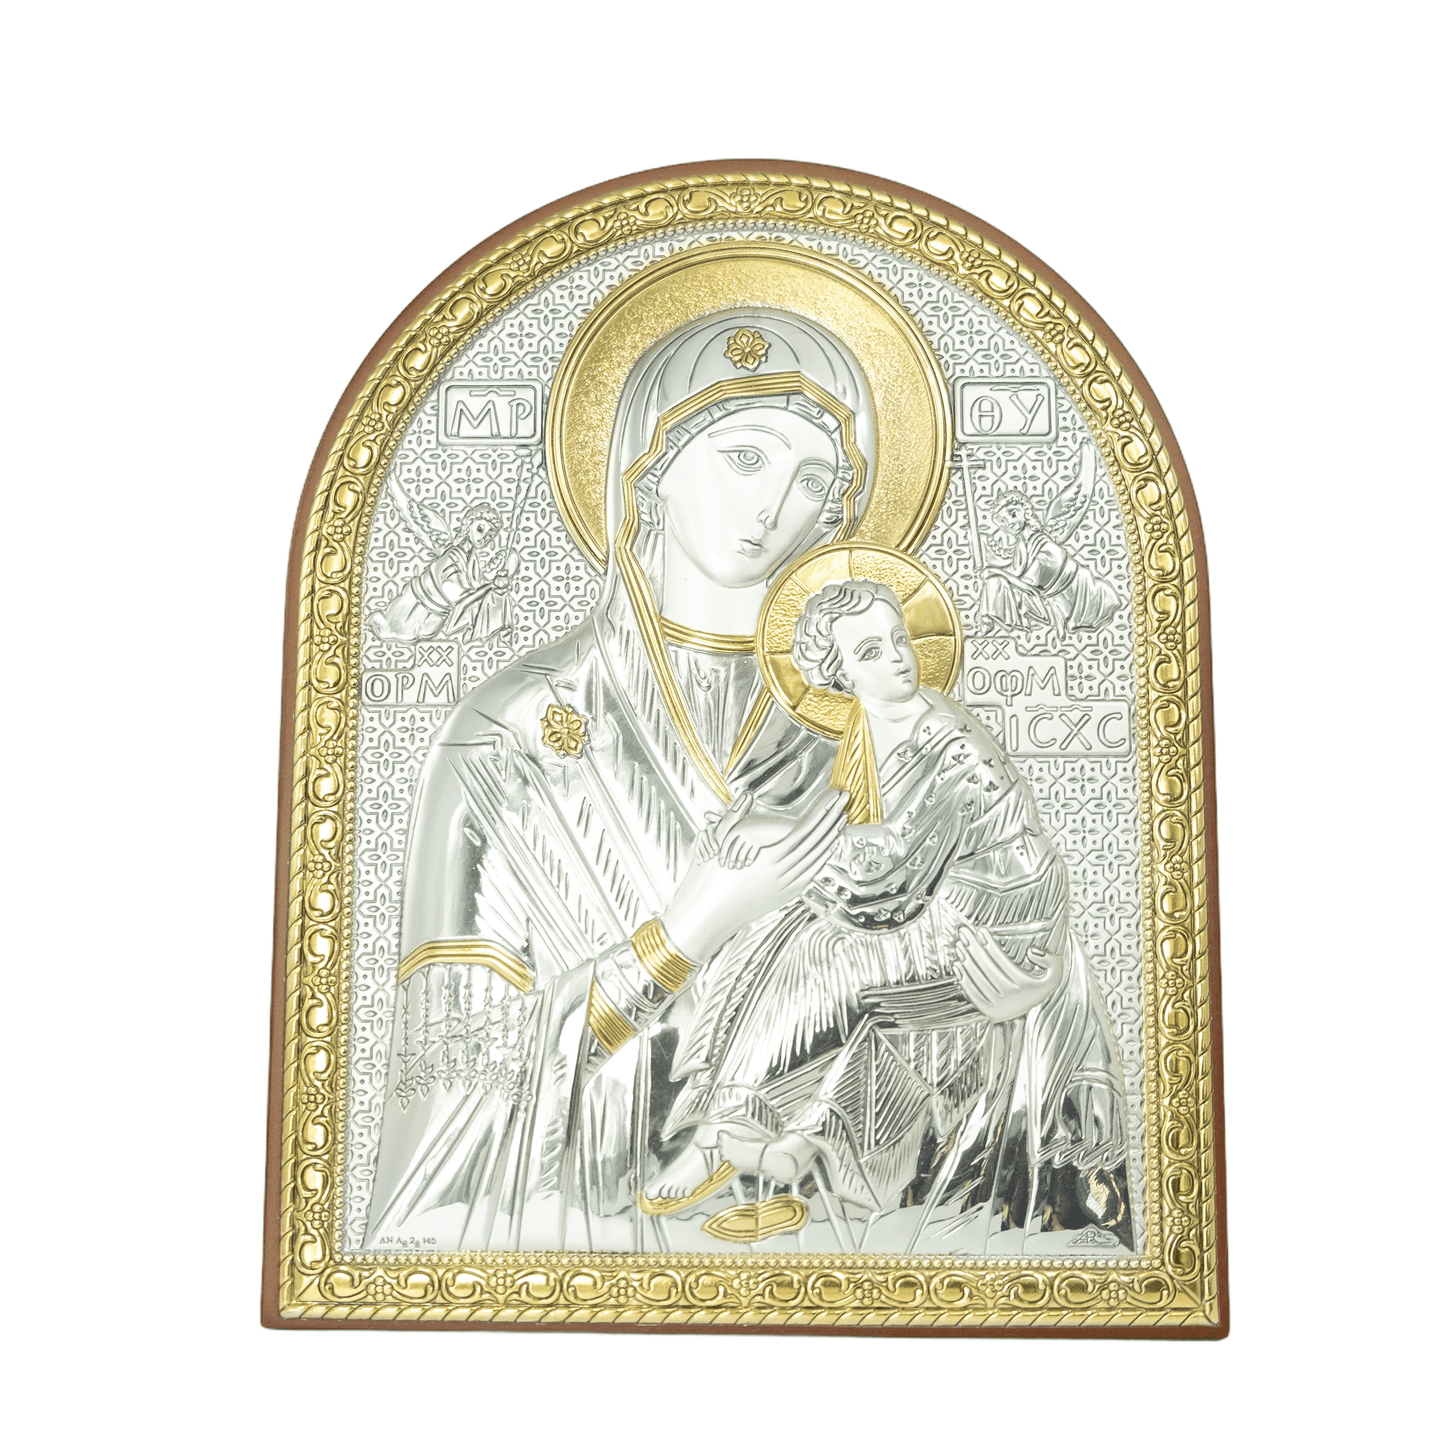 MONDO CATTOLICO 9,5X7,5 cm Our Lady of Perpetual Help Bilaminated Sterling Silver and Golden Details